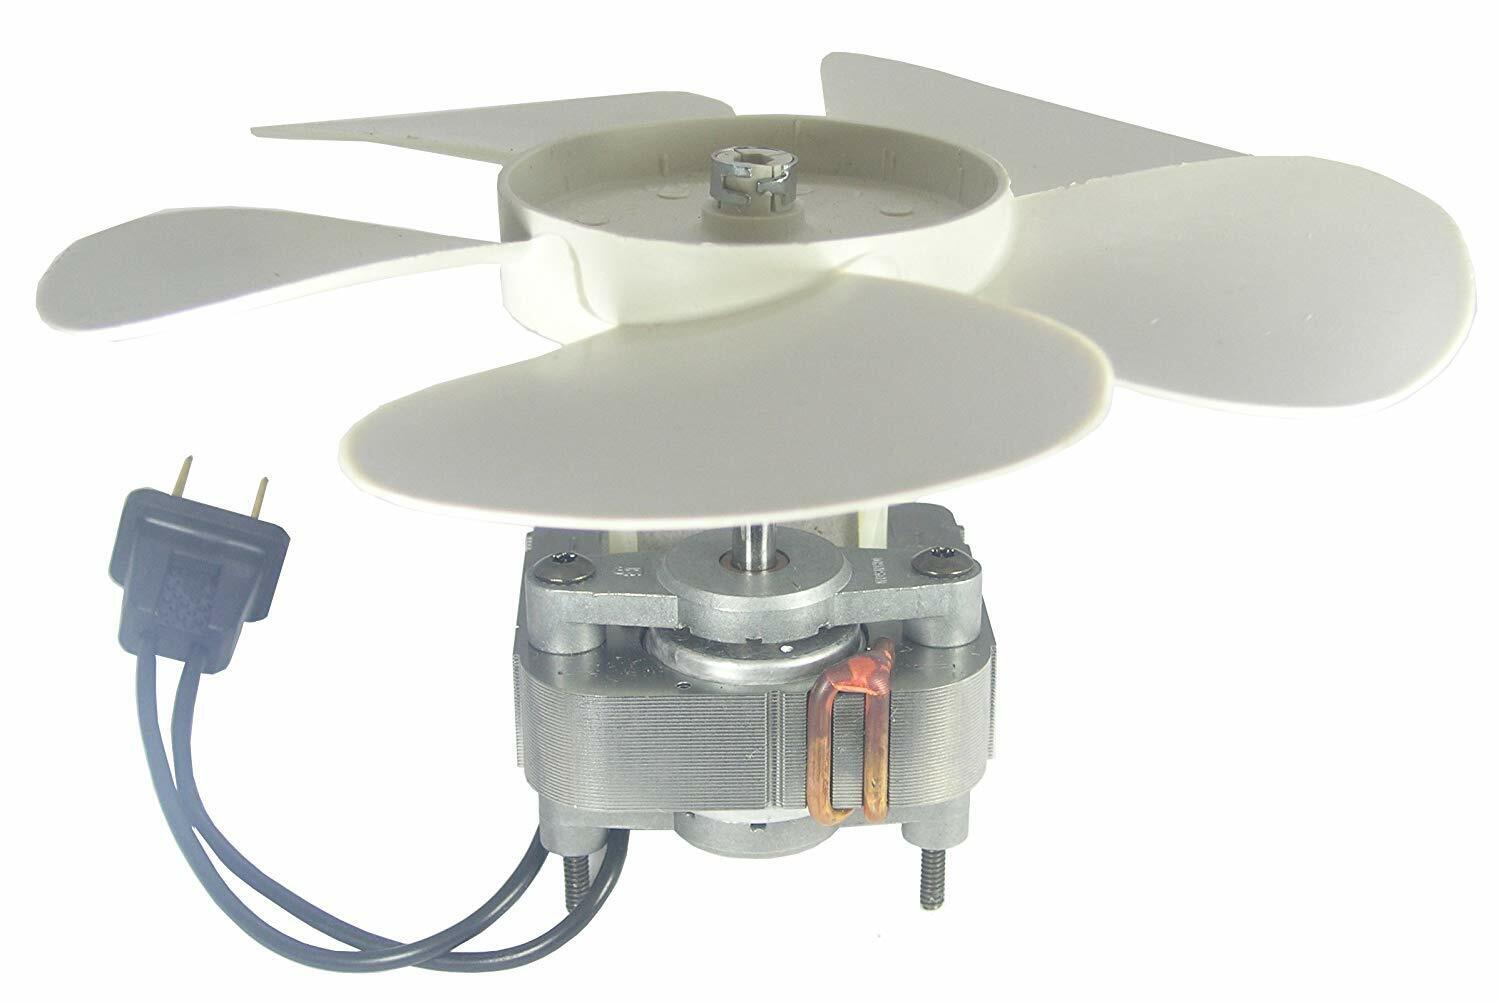 Endurance Pro S1200A000 Bathroom Fan Motor Assembly Replacement for Broan NuTone